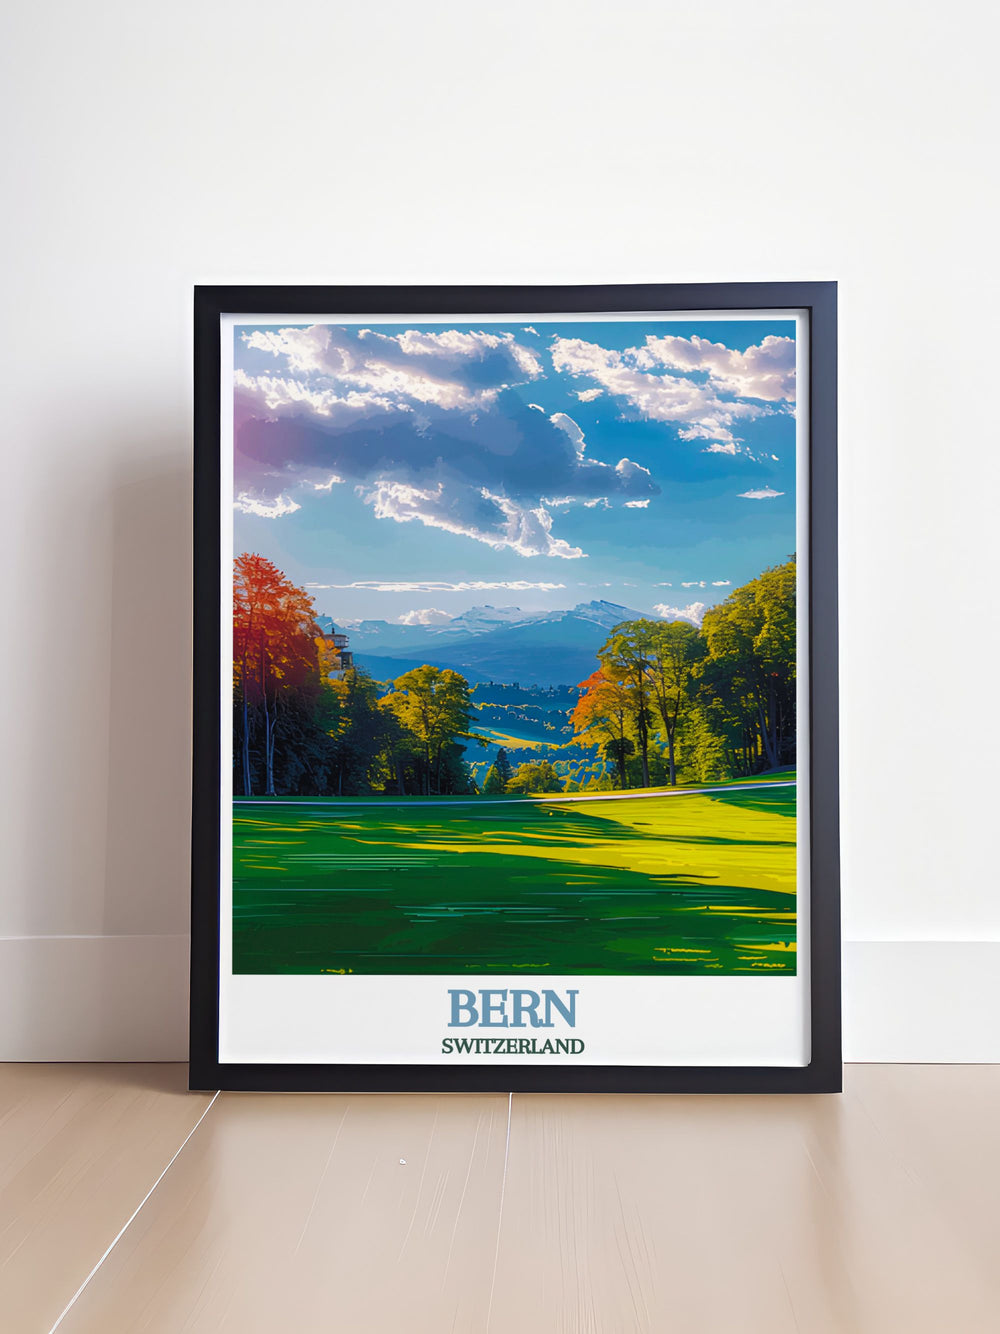 The charm of Bern, with its blend of historical and modern architecture, is brought to life in this poster, offering a piece of Switzerlands rich cultural heritage for your home.